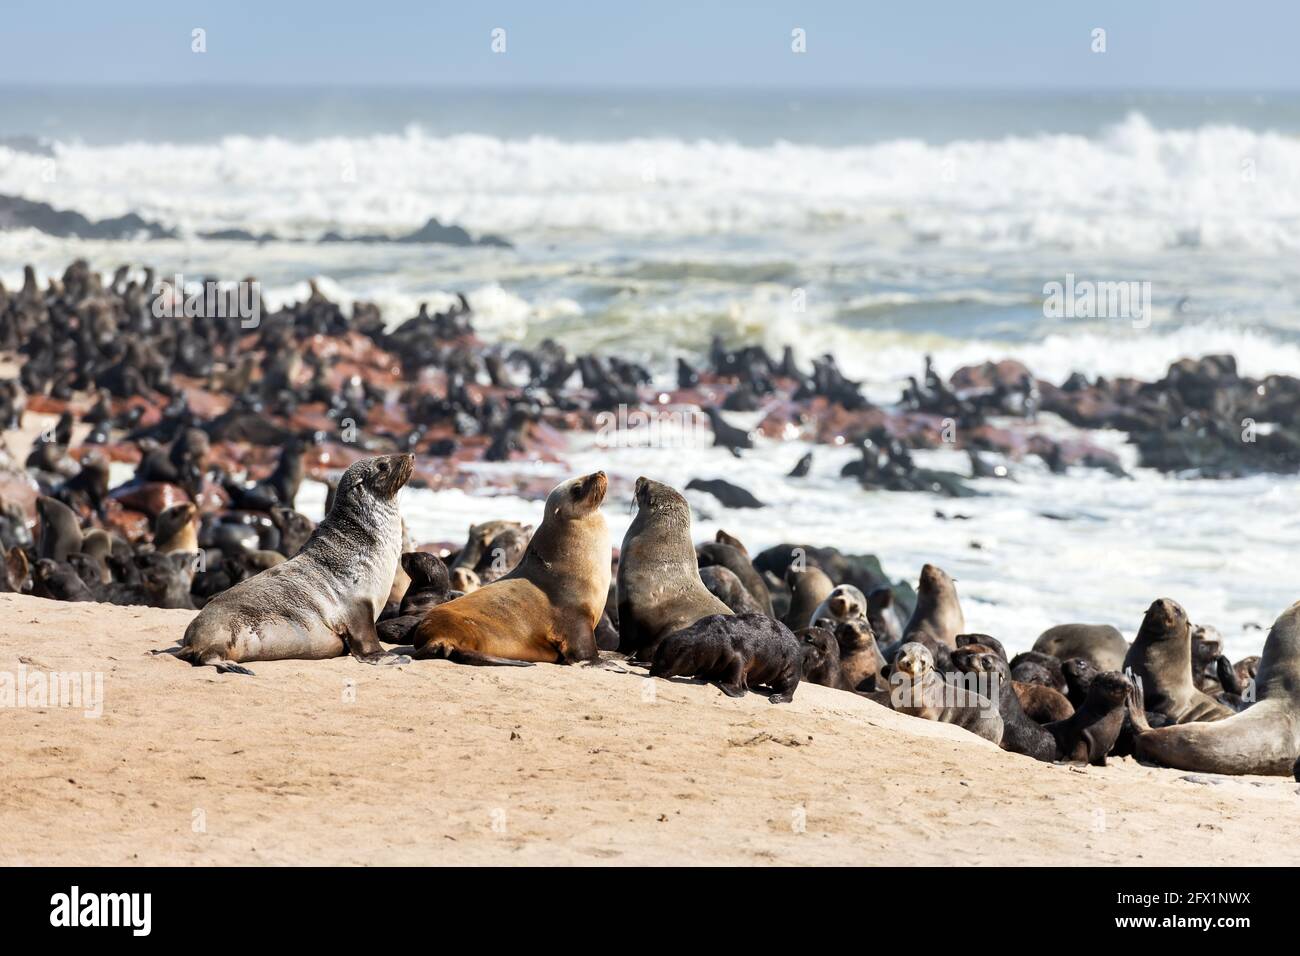 Fur seals enjoy the heat of the sun at the Cape Cross seal colony in Namibia, Africa. Wildlife photography Stock Photo